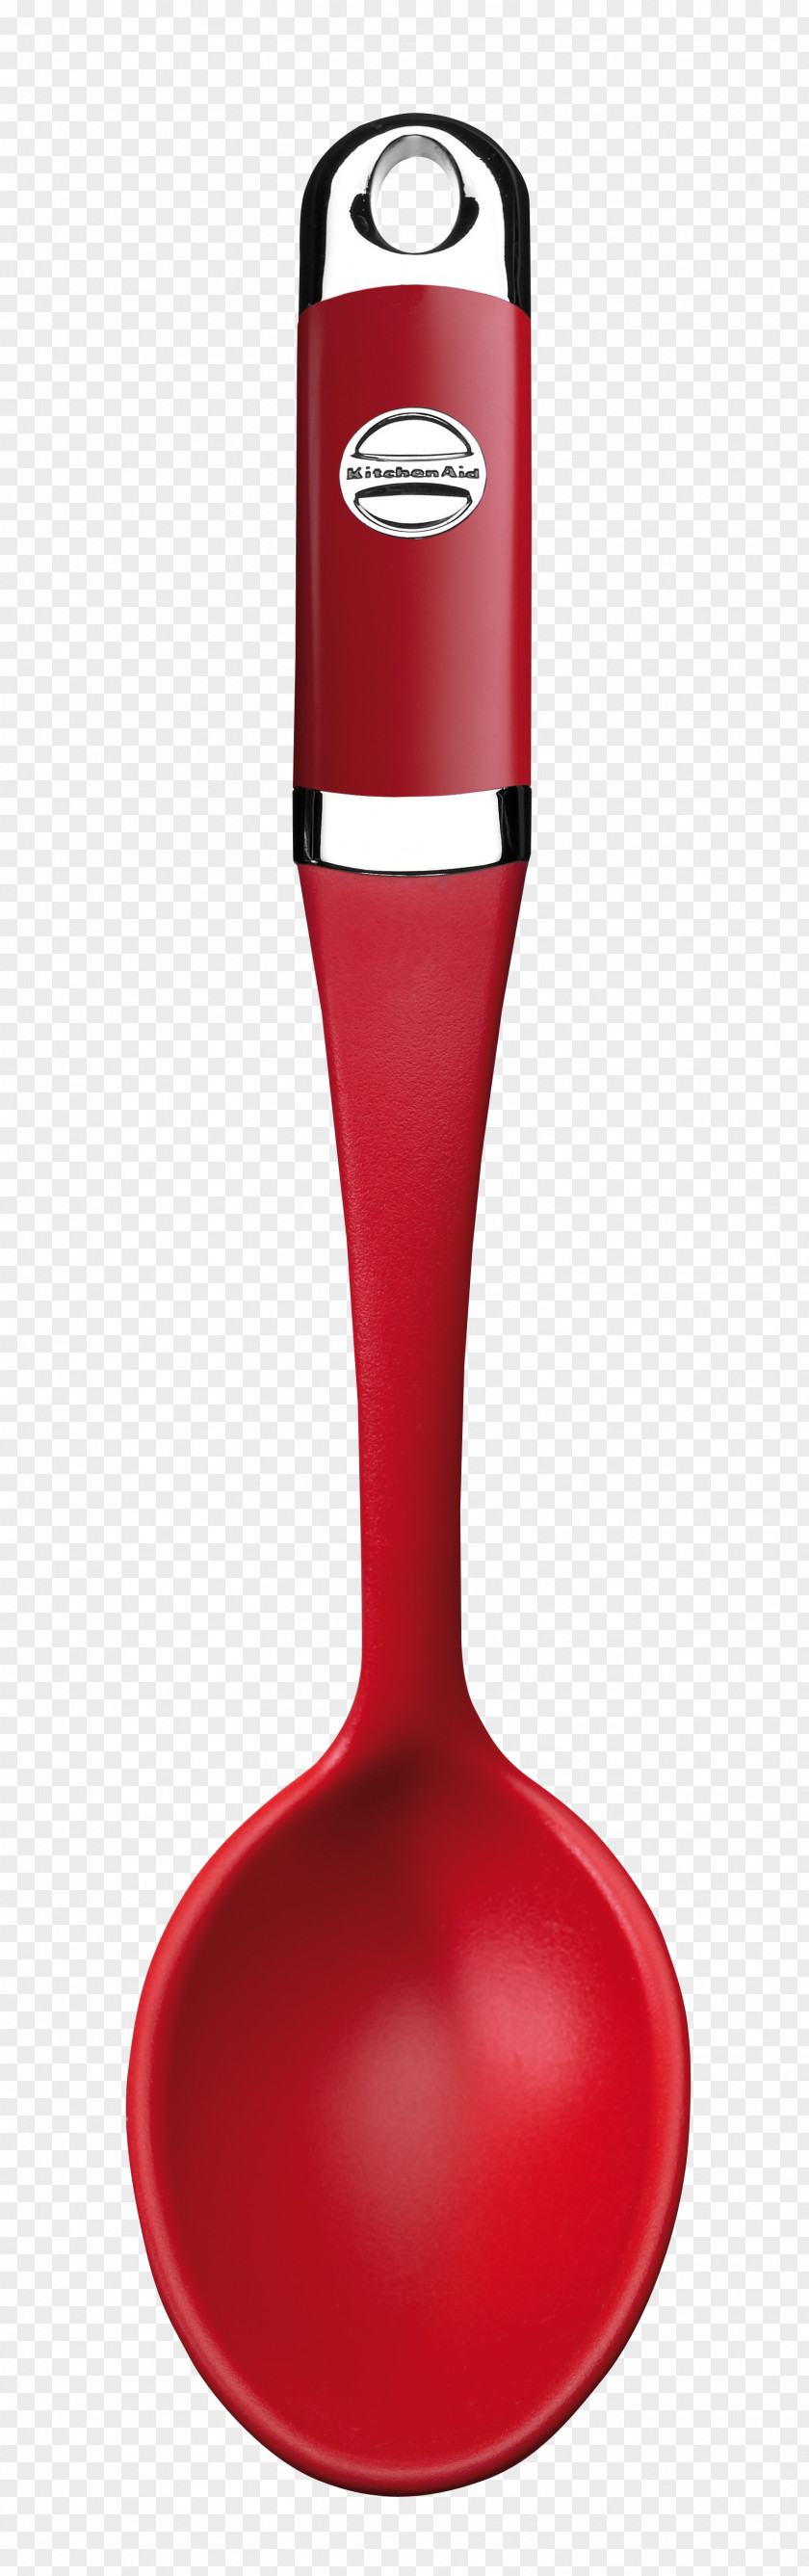 Spoon Slotted Spoons Skimmer KitchenAid PNG